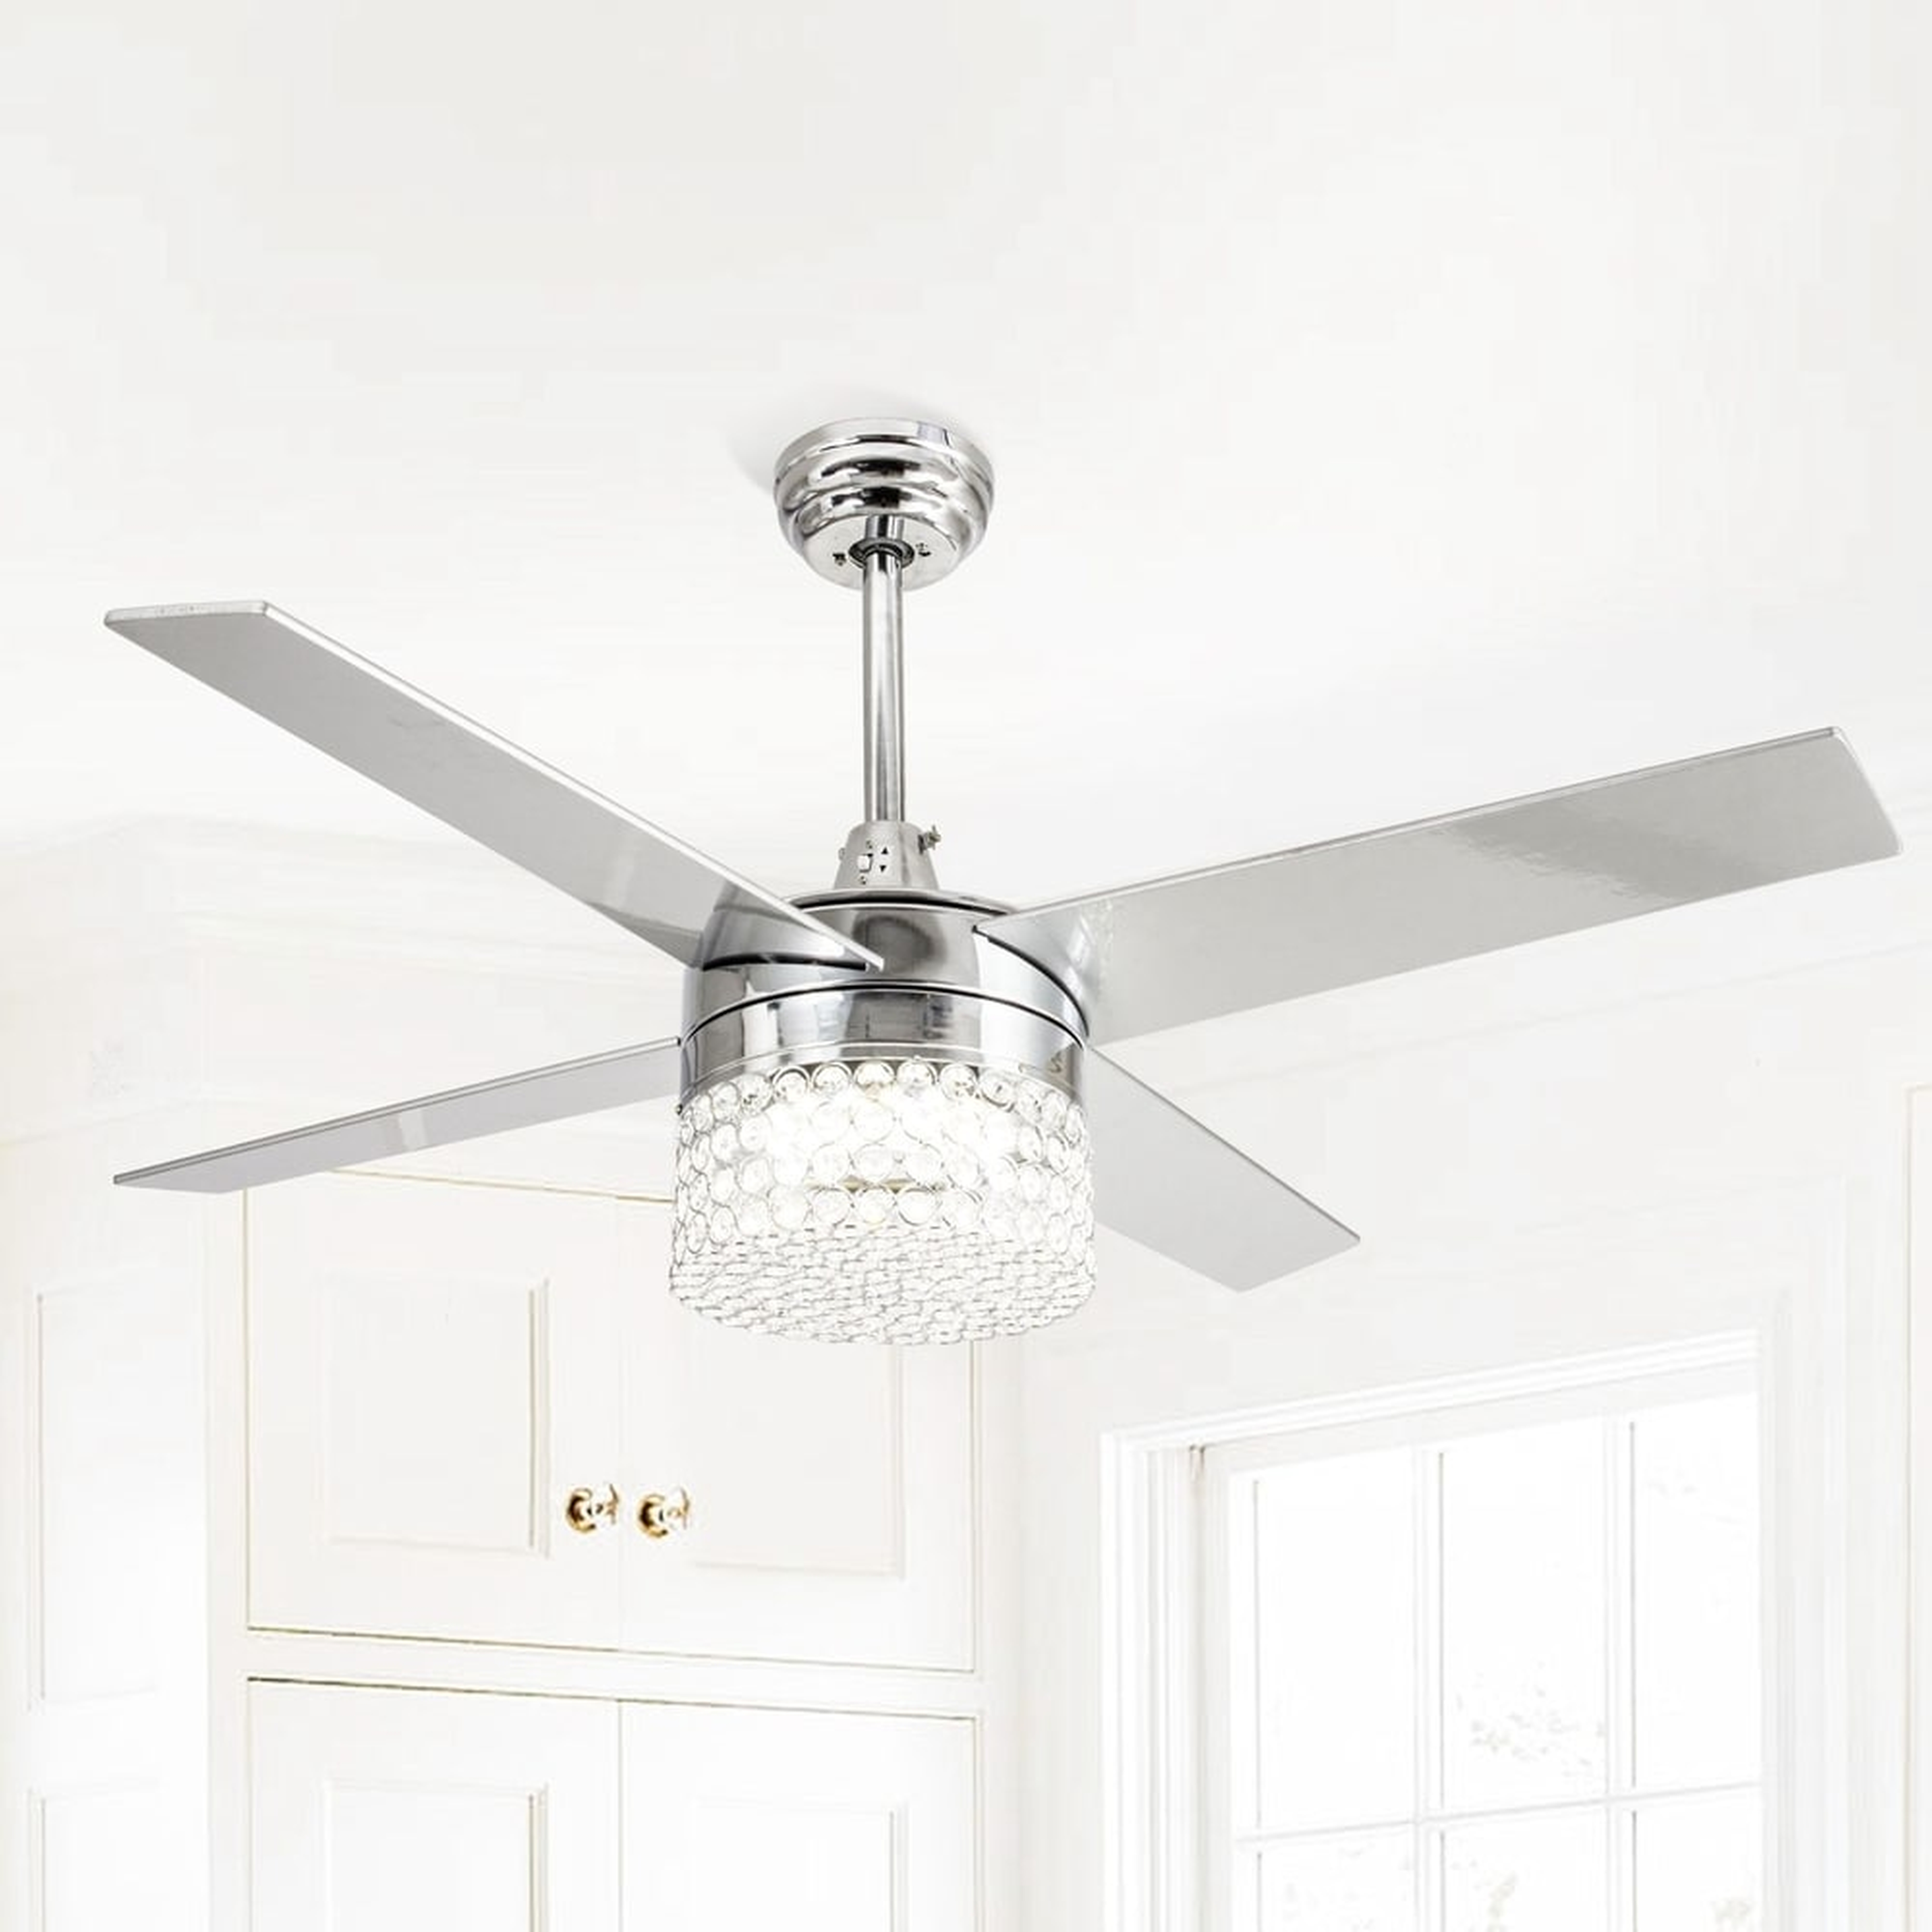 Modern LED 4-Blades 48-inch Crystal Ceiling Fan with Remote - D:48”*H:12” - Overstock